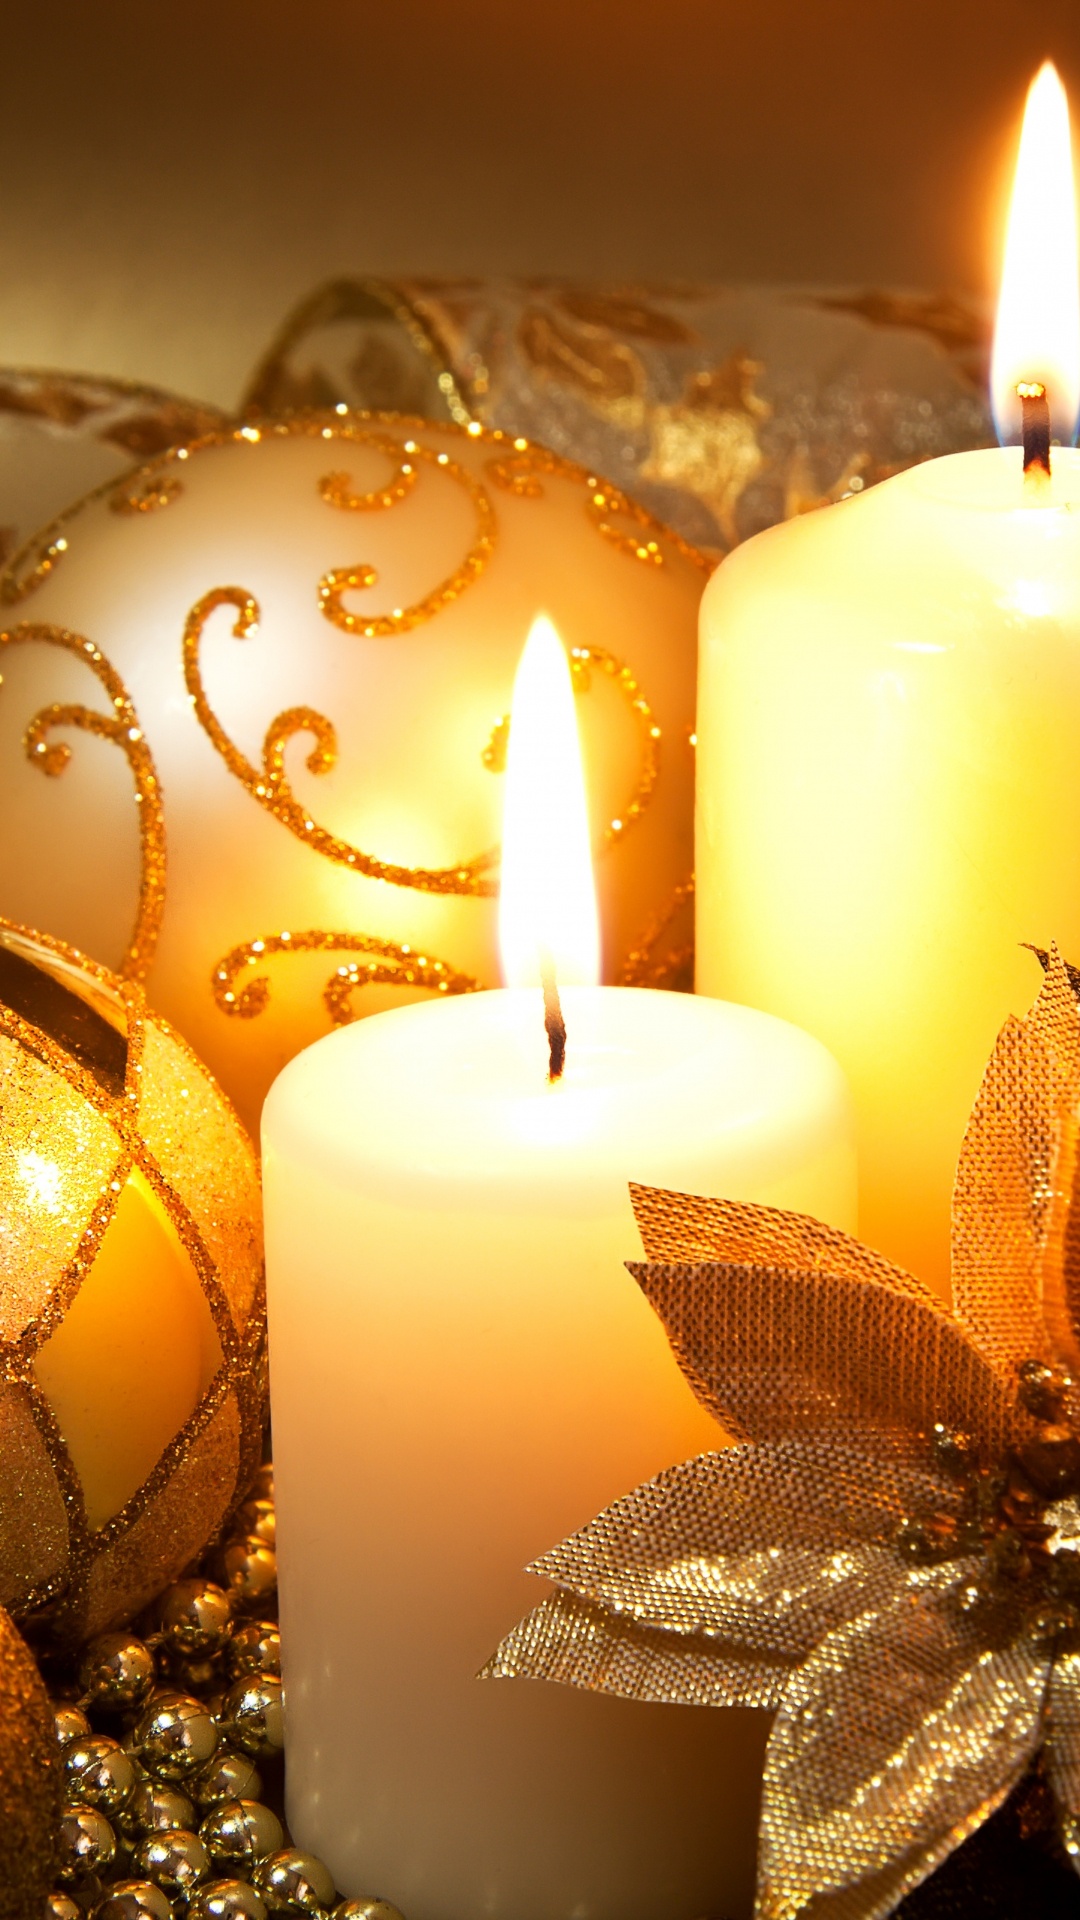 Christmas Decoration, Christmas Day, Christmas Ornament, Candle, Still Life. Wallpaper in 1080x1920 Resolution